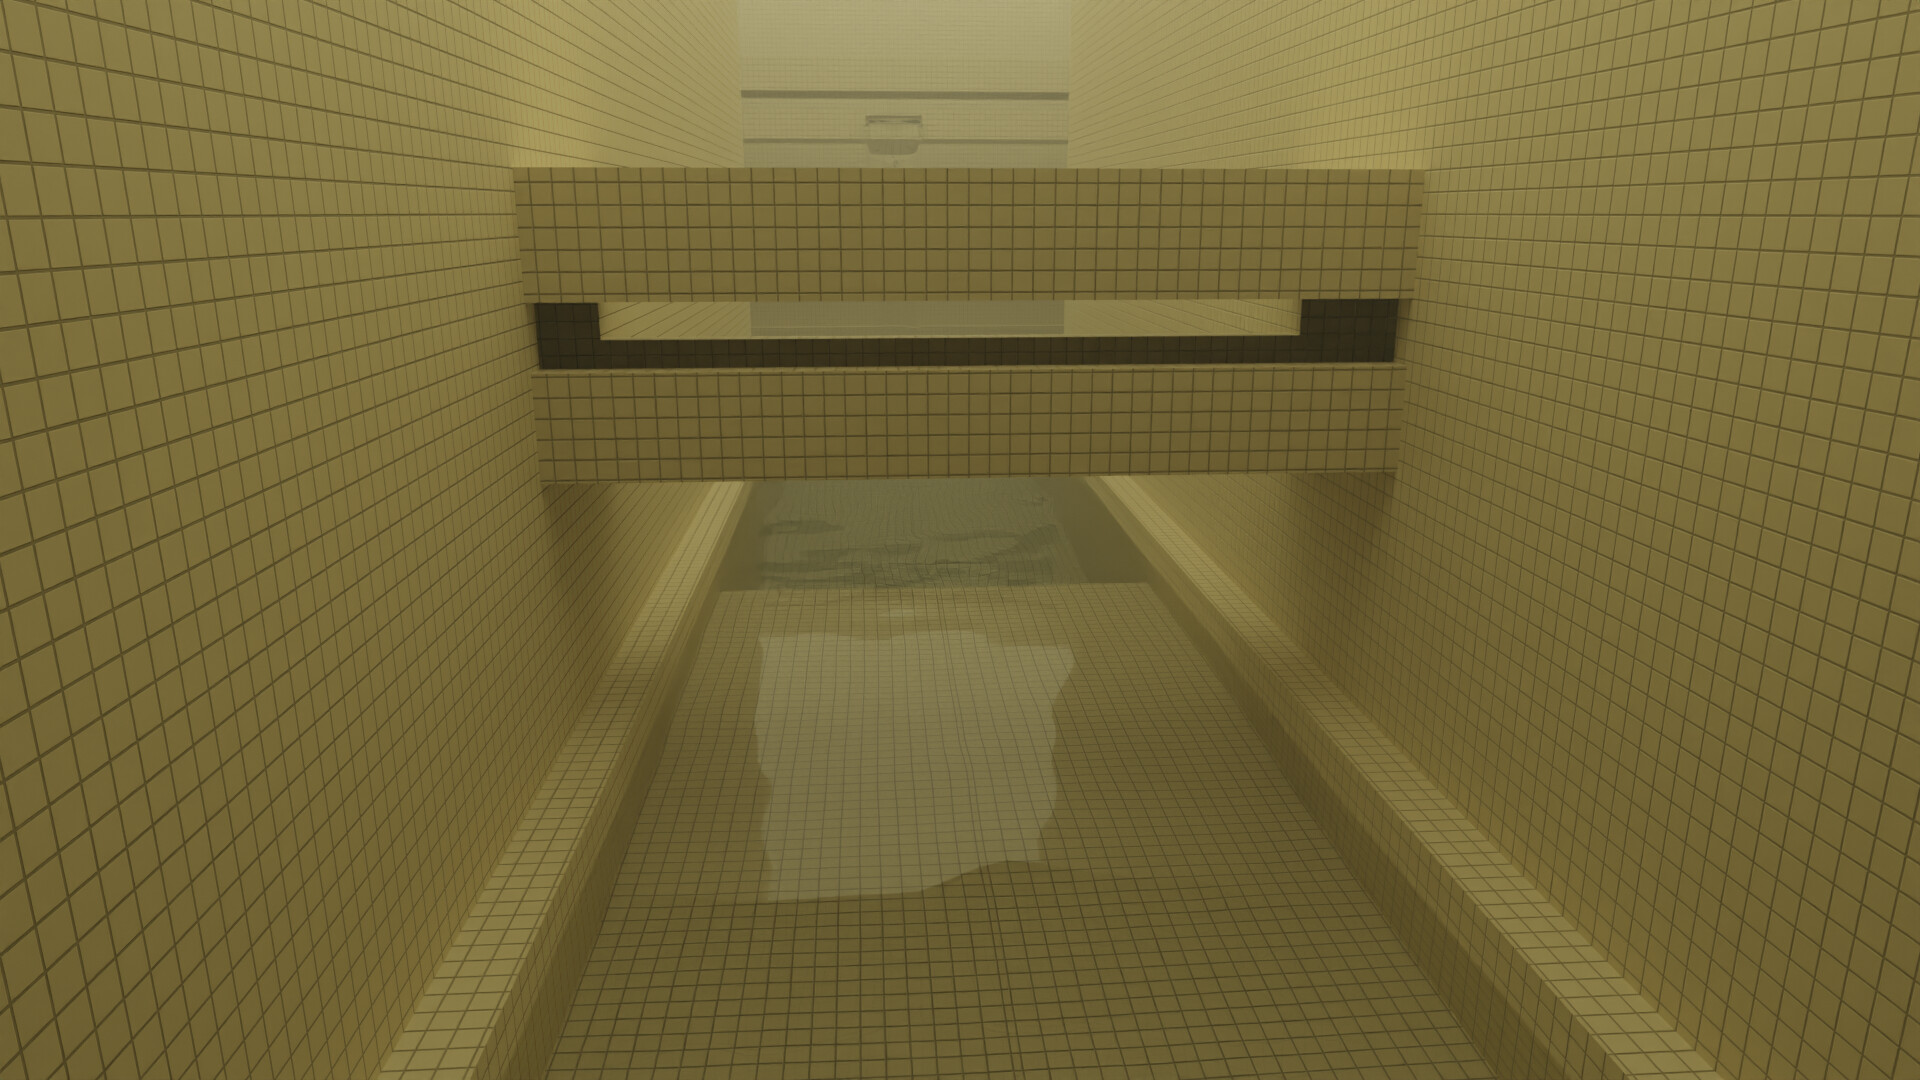 Poolrooms (Pool Tile Texture Pack) Minecraft Texture Pack